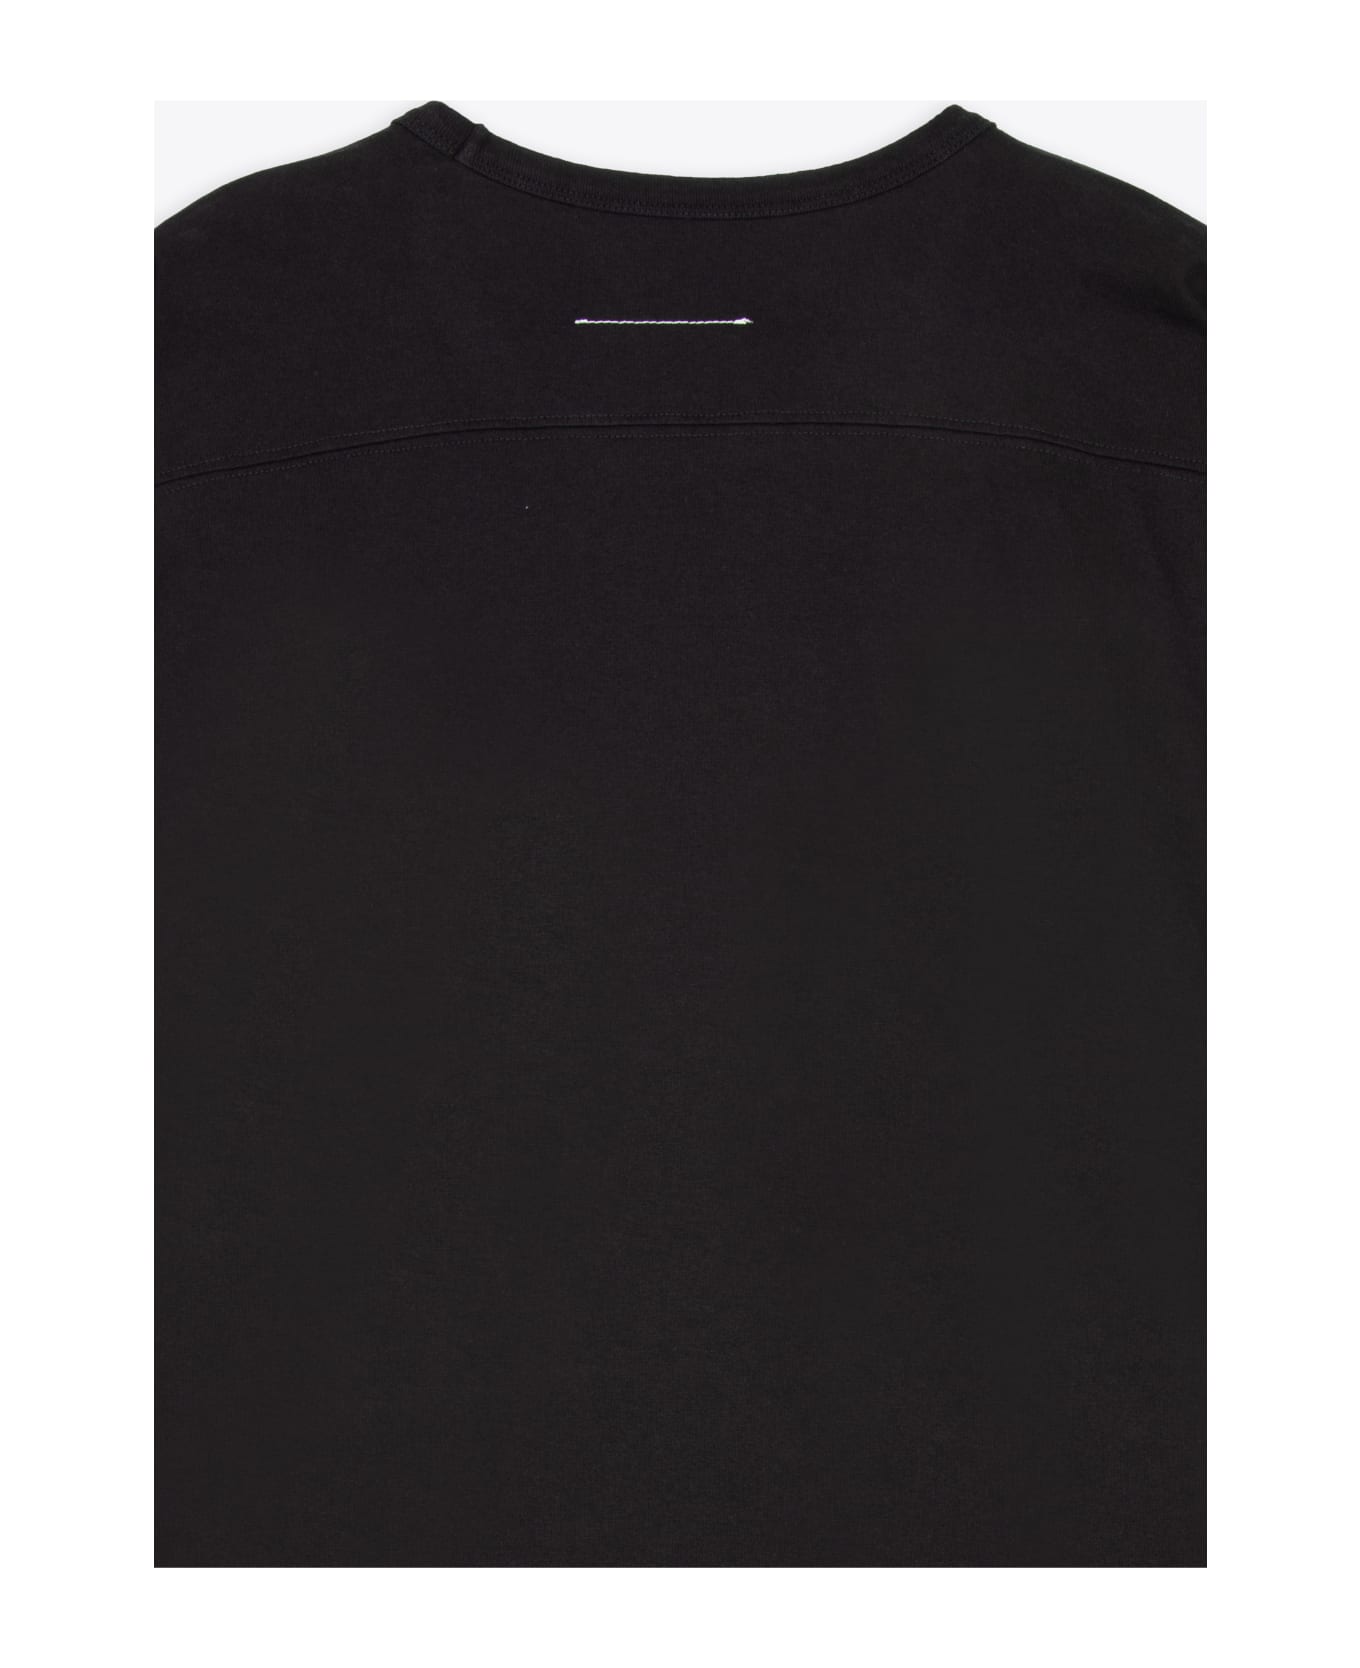 MM6 Maison Margiela T-shirt Black Relaxed T-shirt With 3/4 Sleeves Lenght - Nero